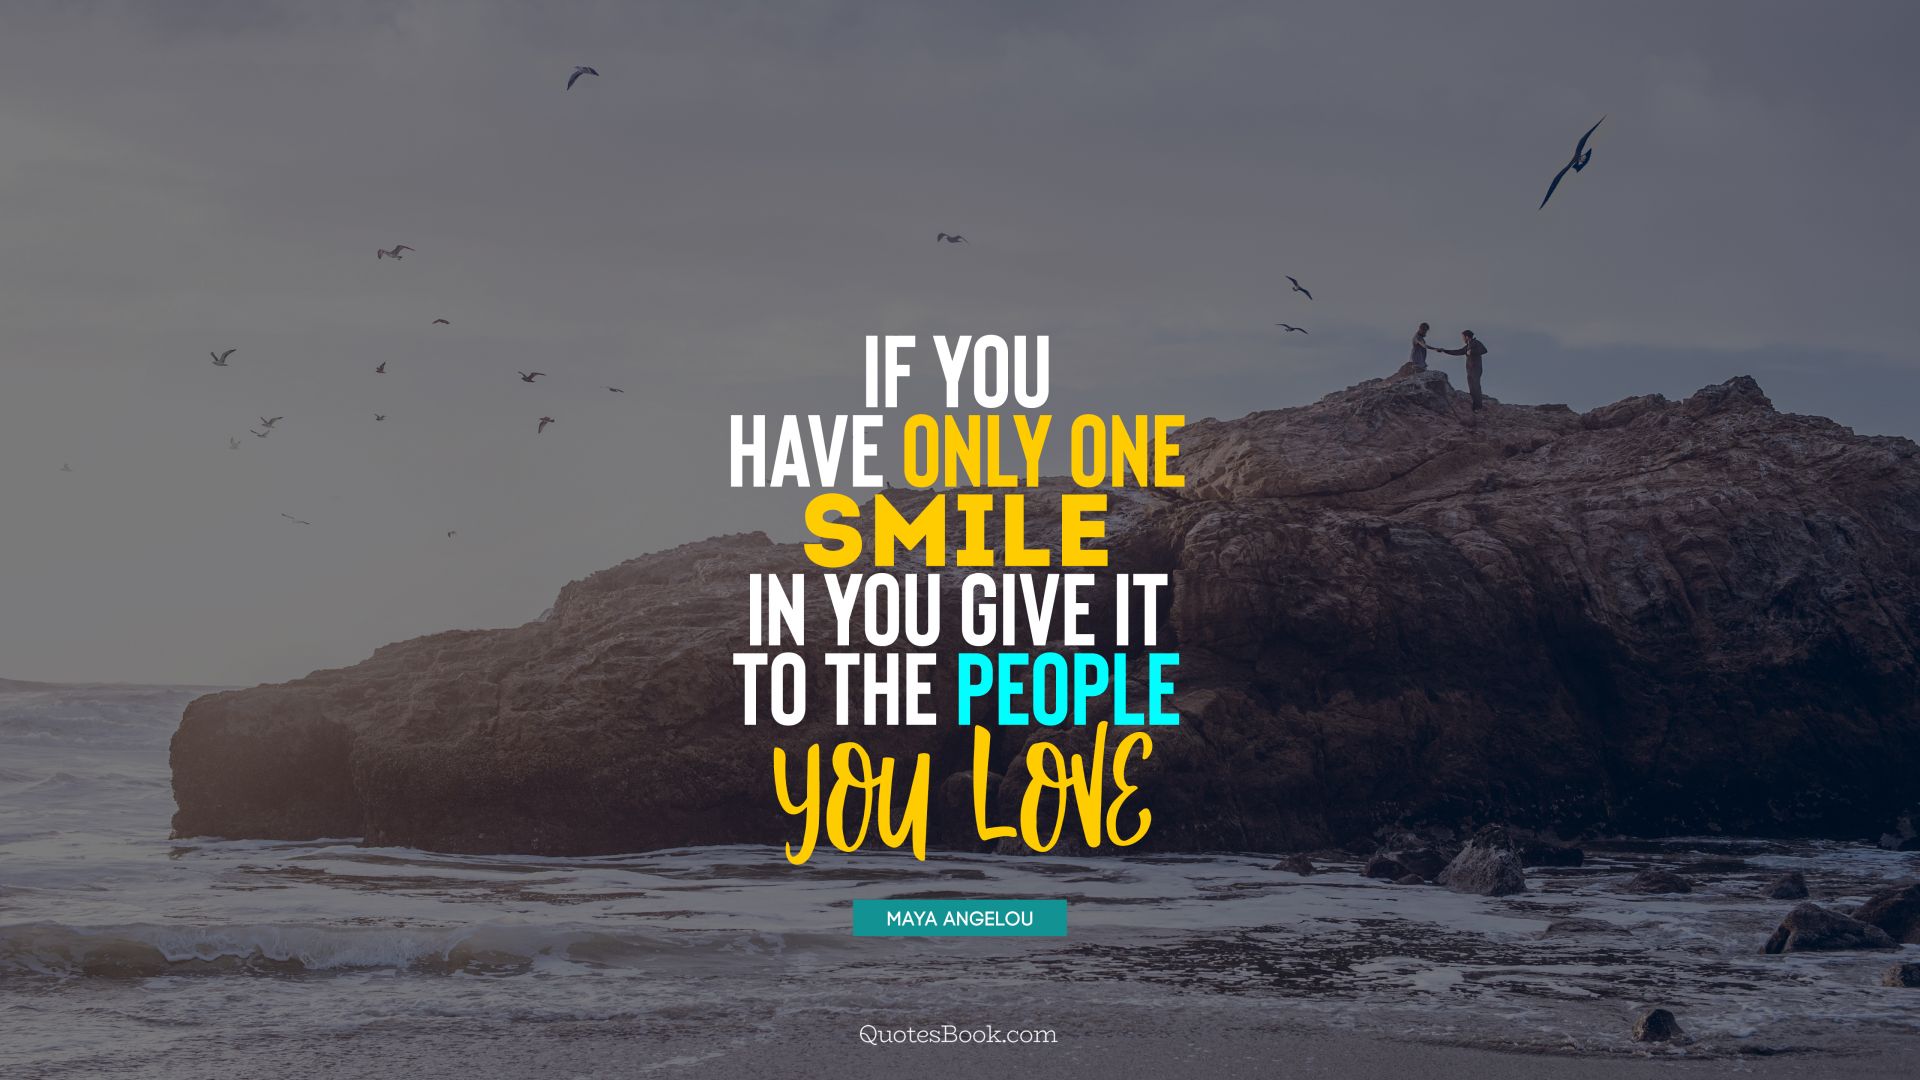 If you have only one smile in you give it to the people you love. - Quote by Maya Angelou